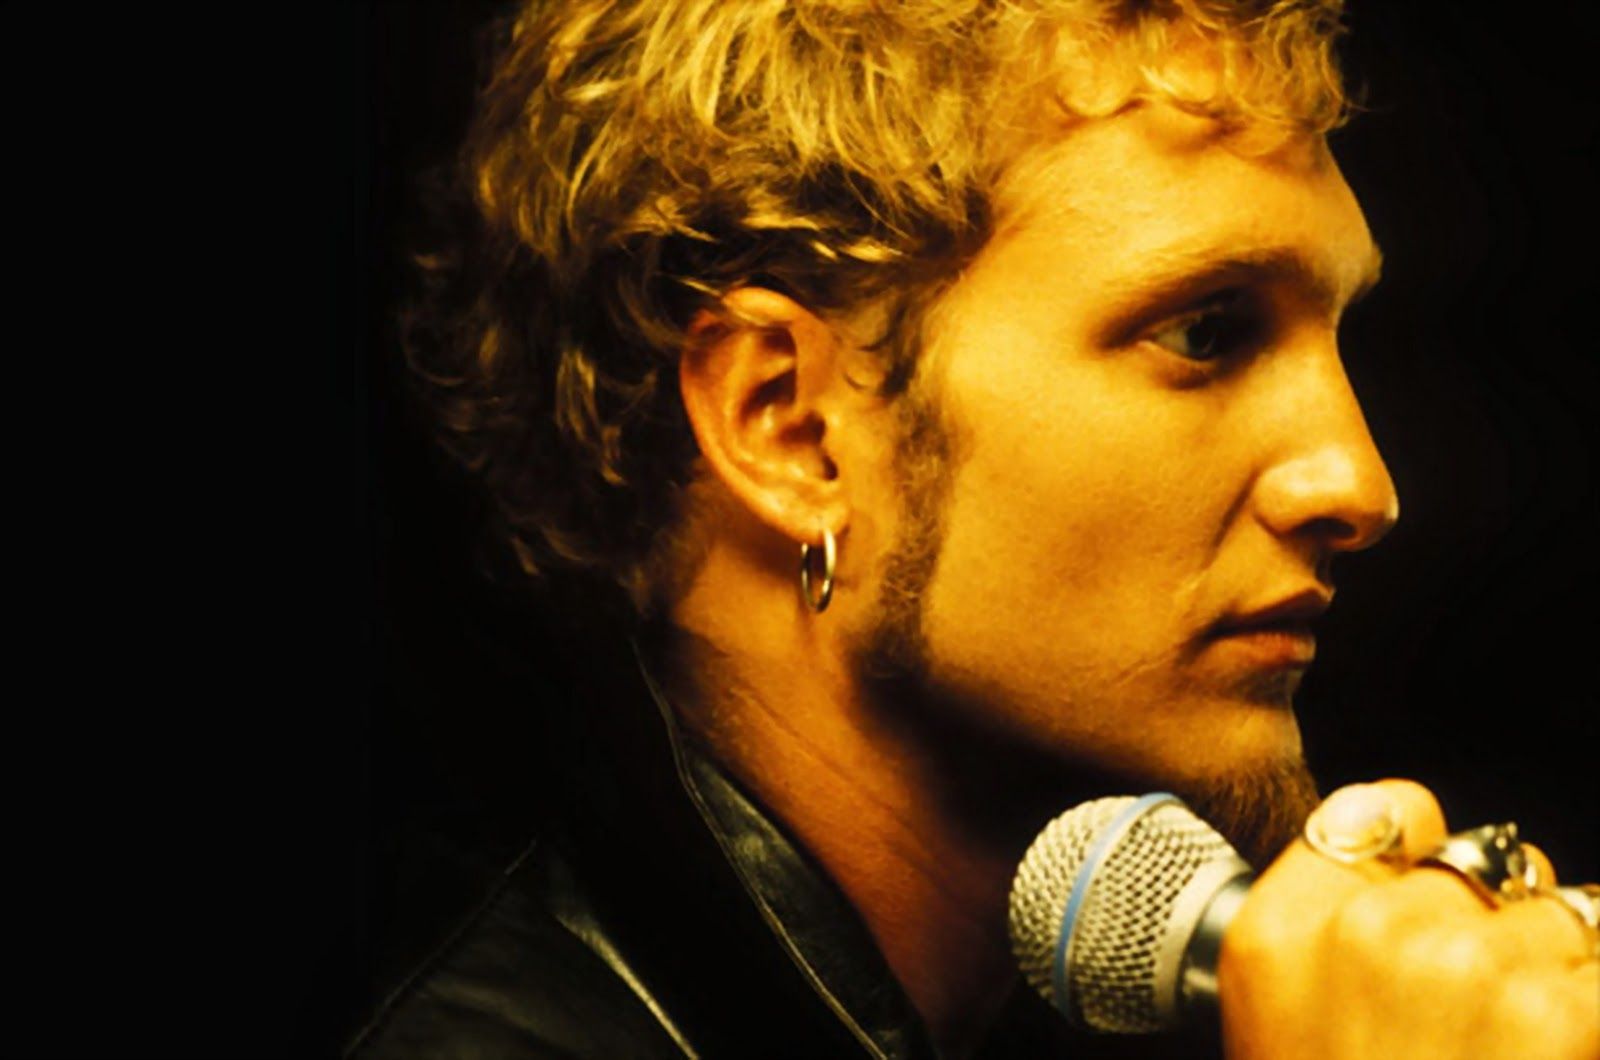 Layne Staley Wallpapers - Wallpaper Cave